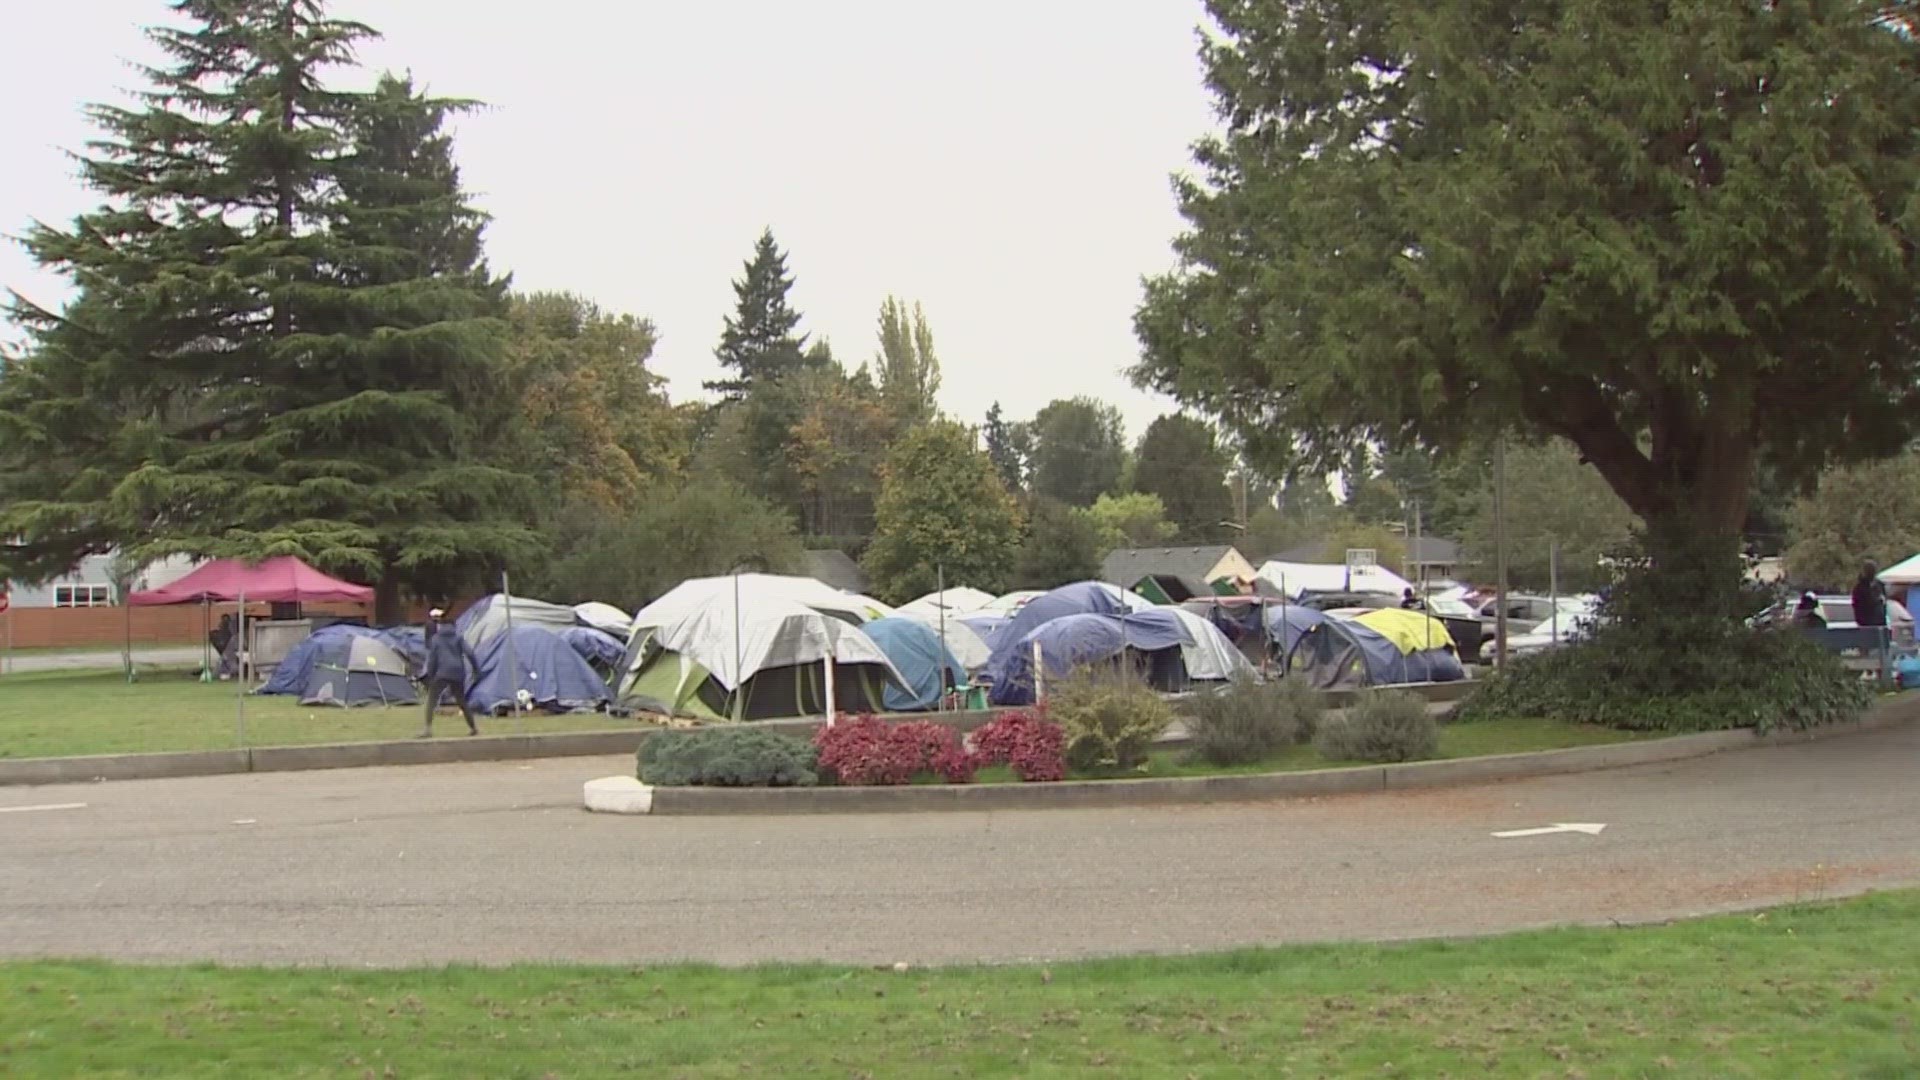 King County has hired a service provider and begun funding up to 100 hotel rooms for people living in and around the Riverton Park United Methodist Church in Tukwila